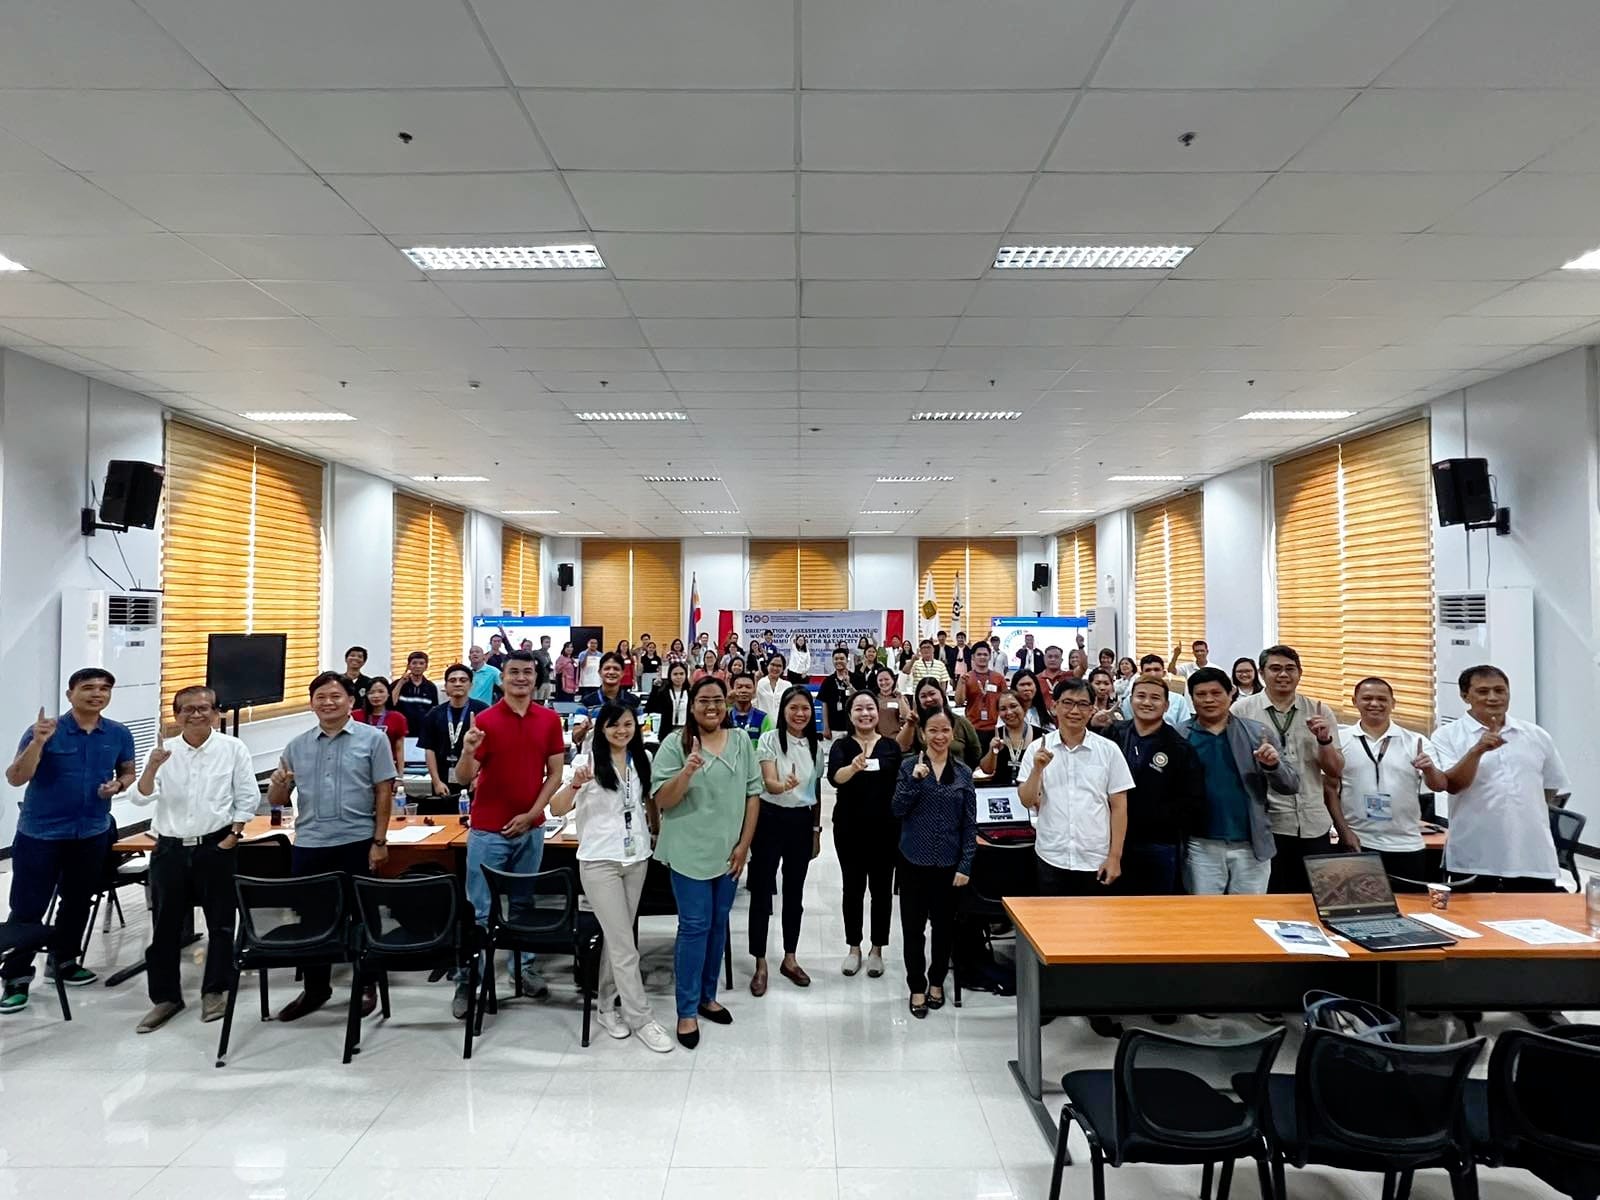 CITY OF BATAC COMMENCES ITS JOURNEY TOWARDS BECOMING A SMART AND SUSTAINABLE CITY